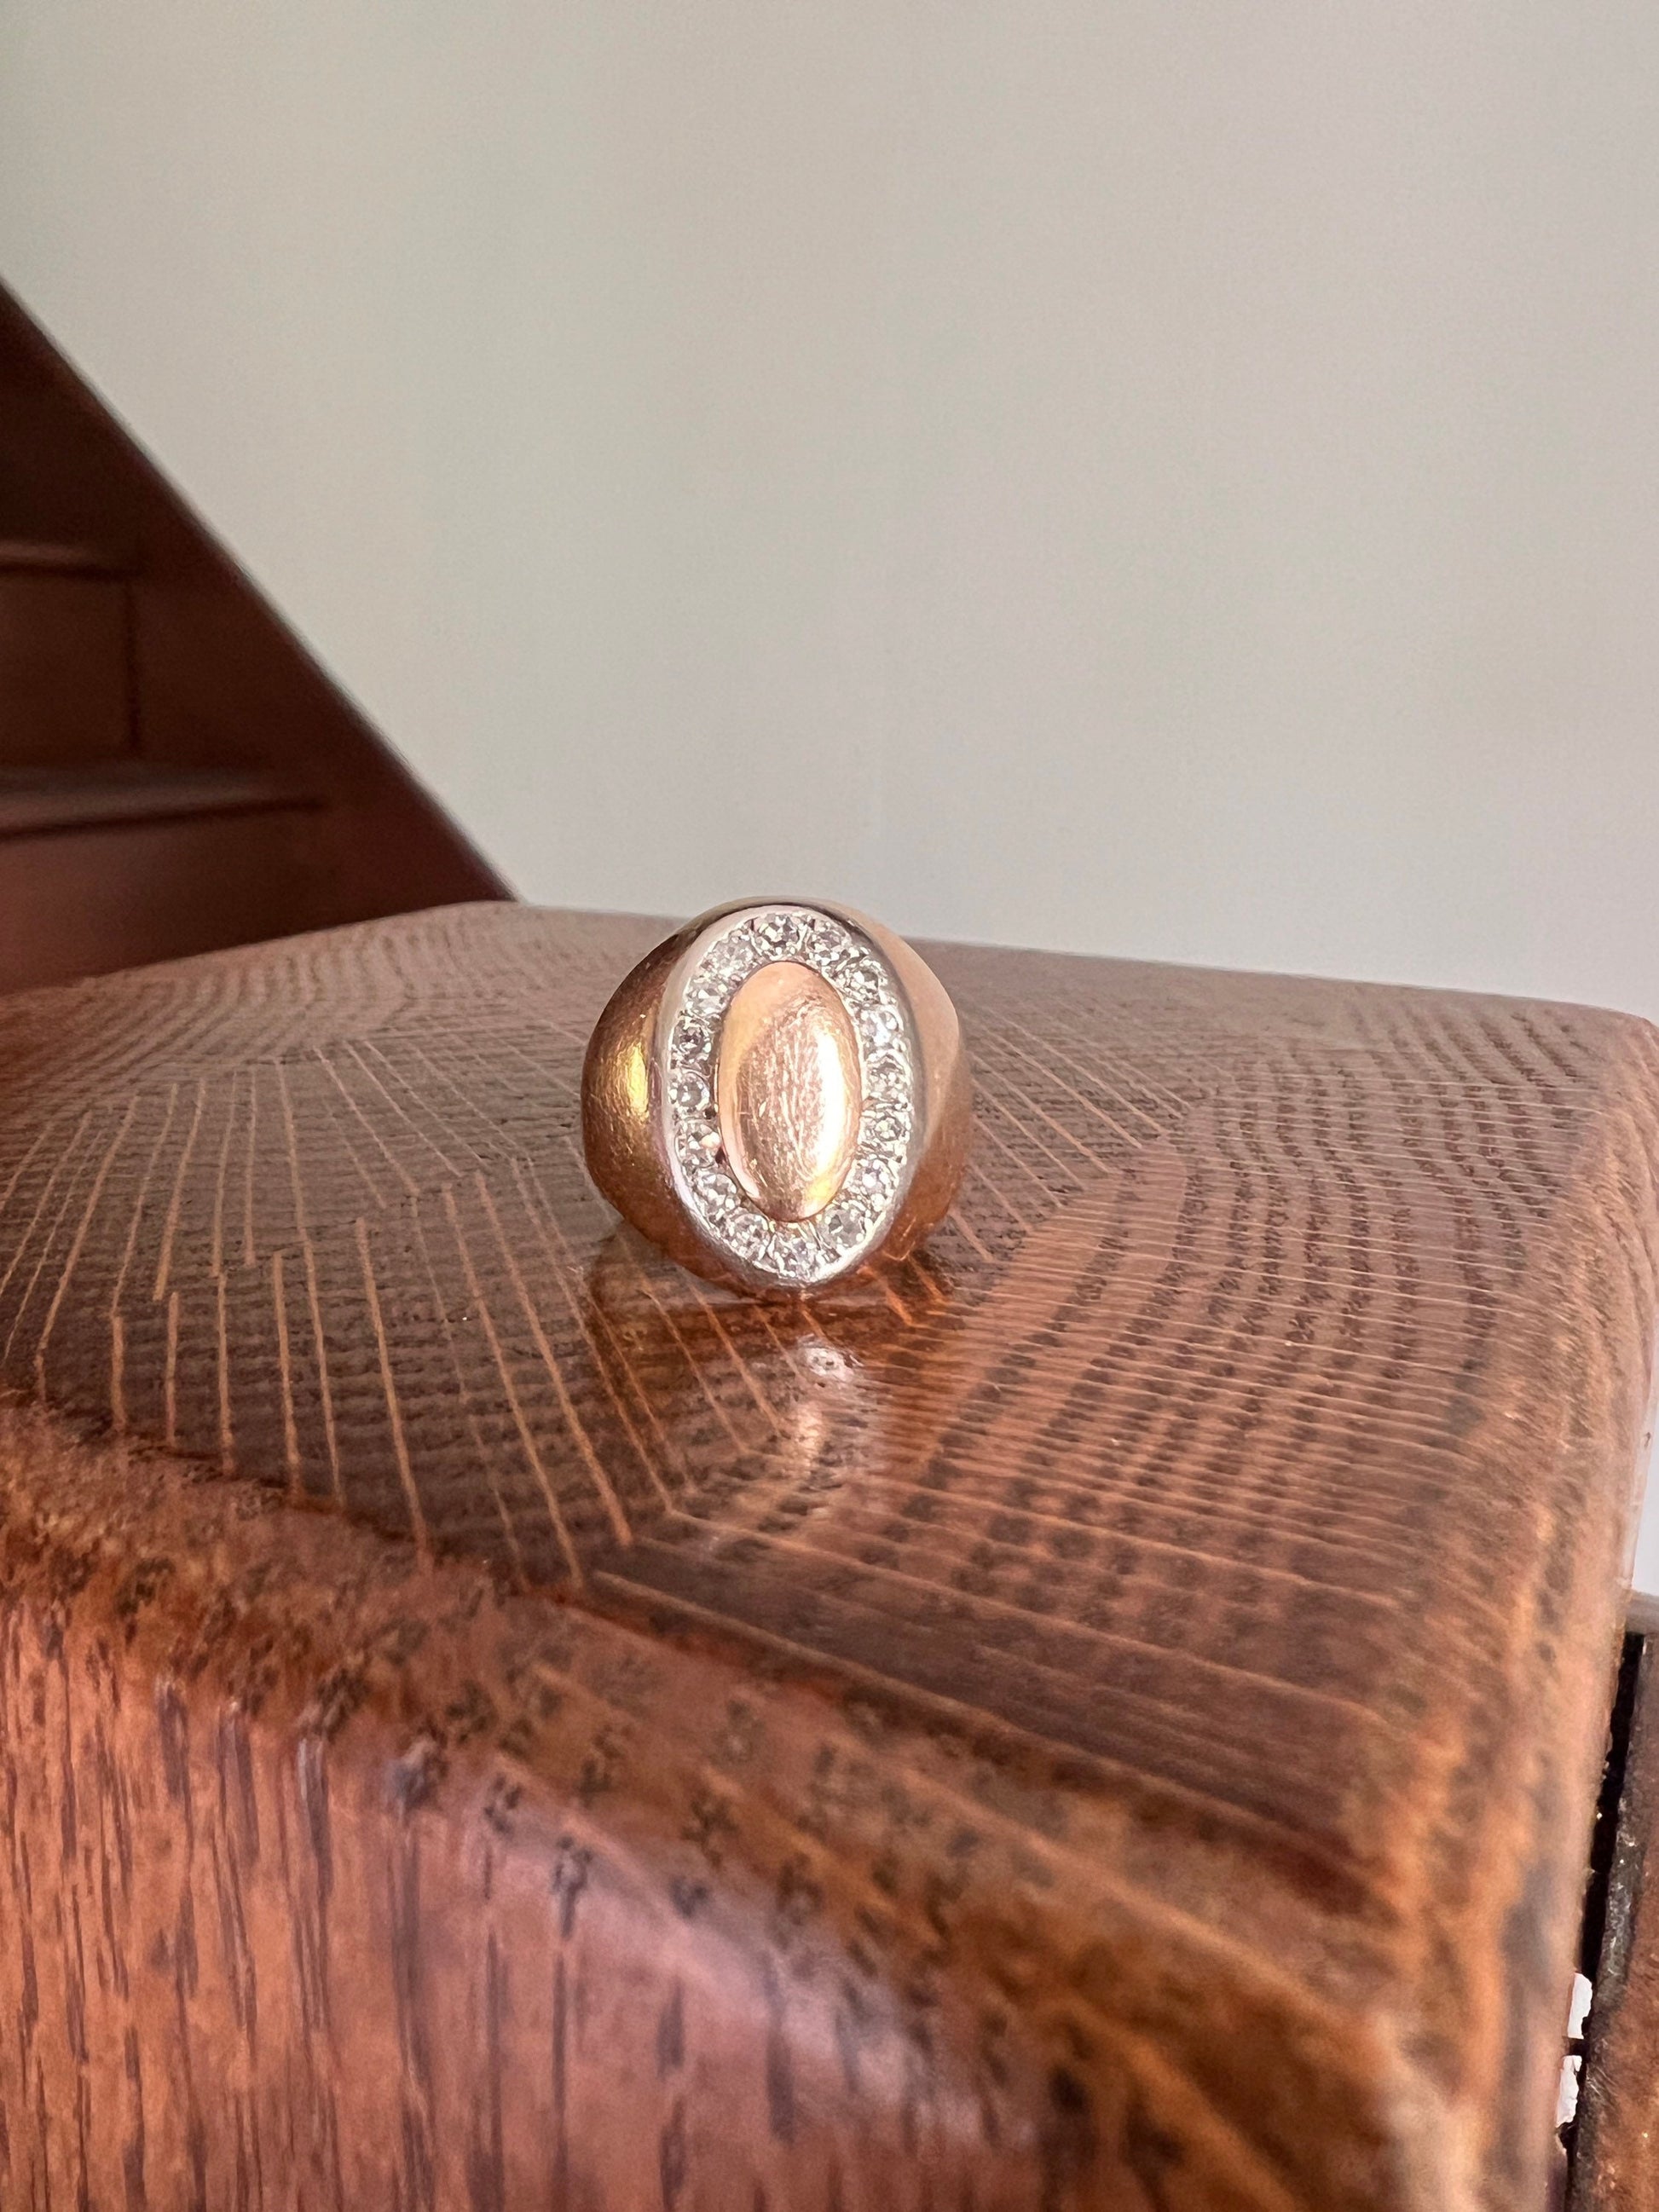 French Antique Art Deco Old Single Cut DIAMOND Halo Signet Oval Geometric Ring Chunky Band 9.5g 18k Gold Romantic Gift Stacker Belle Epoque